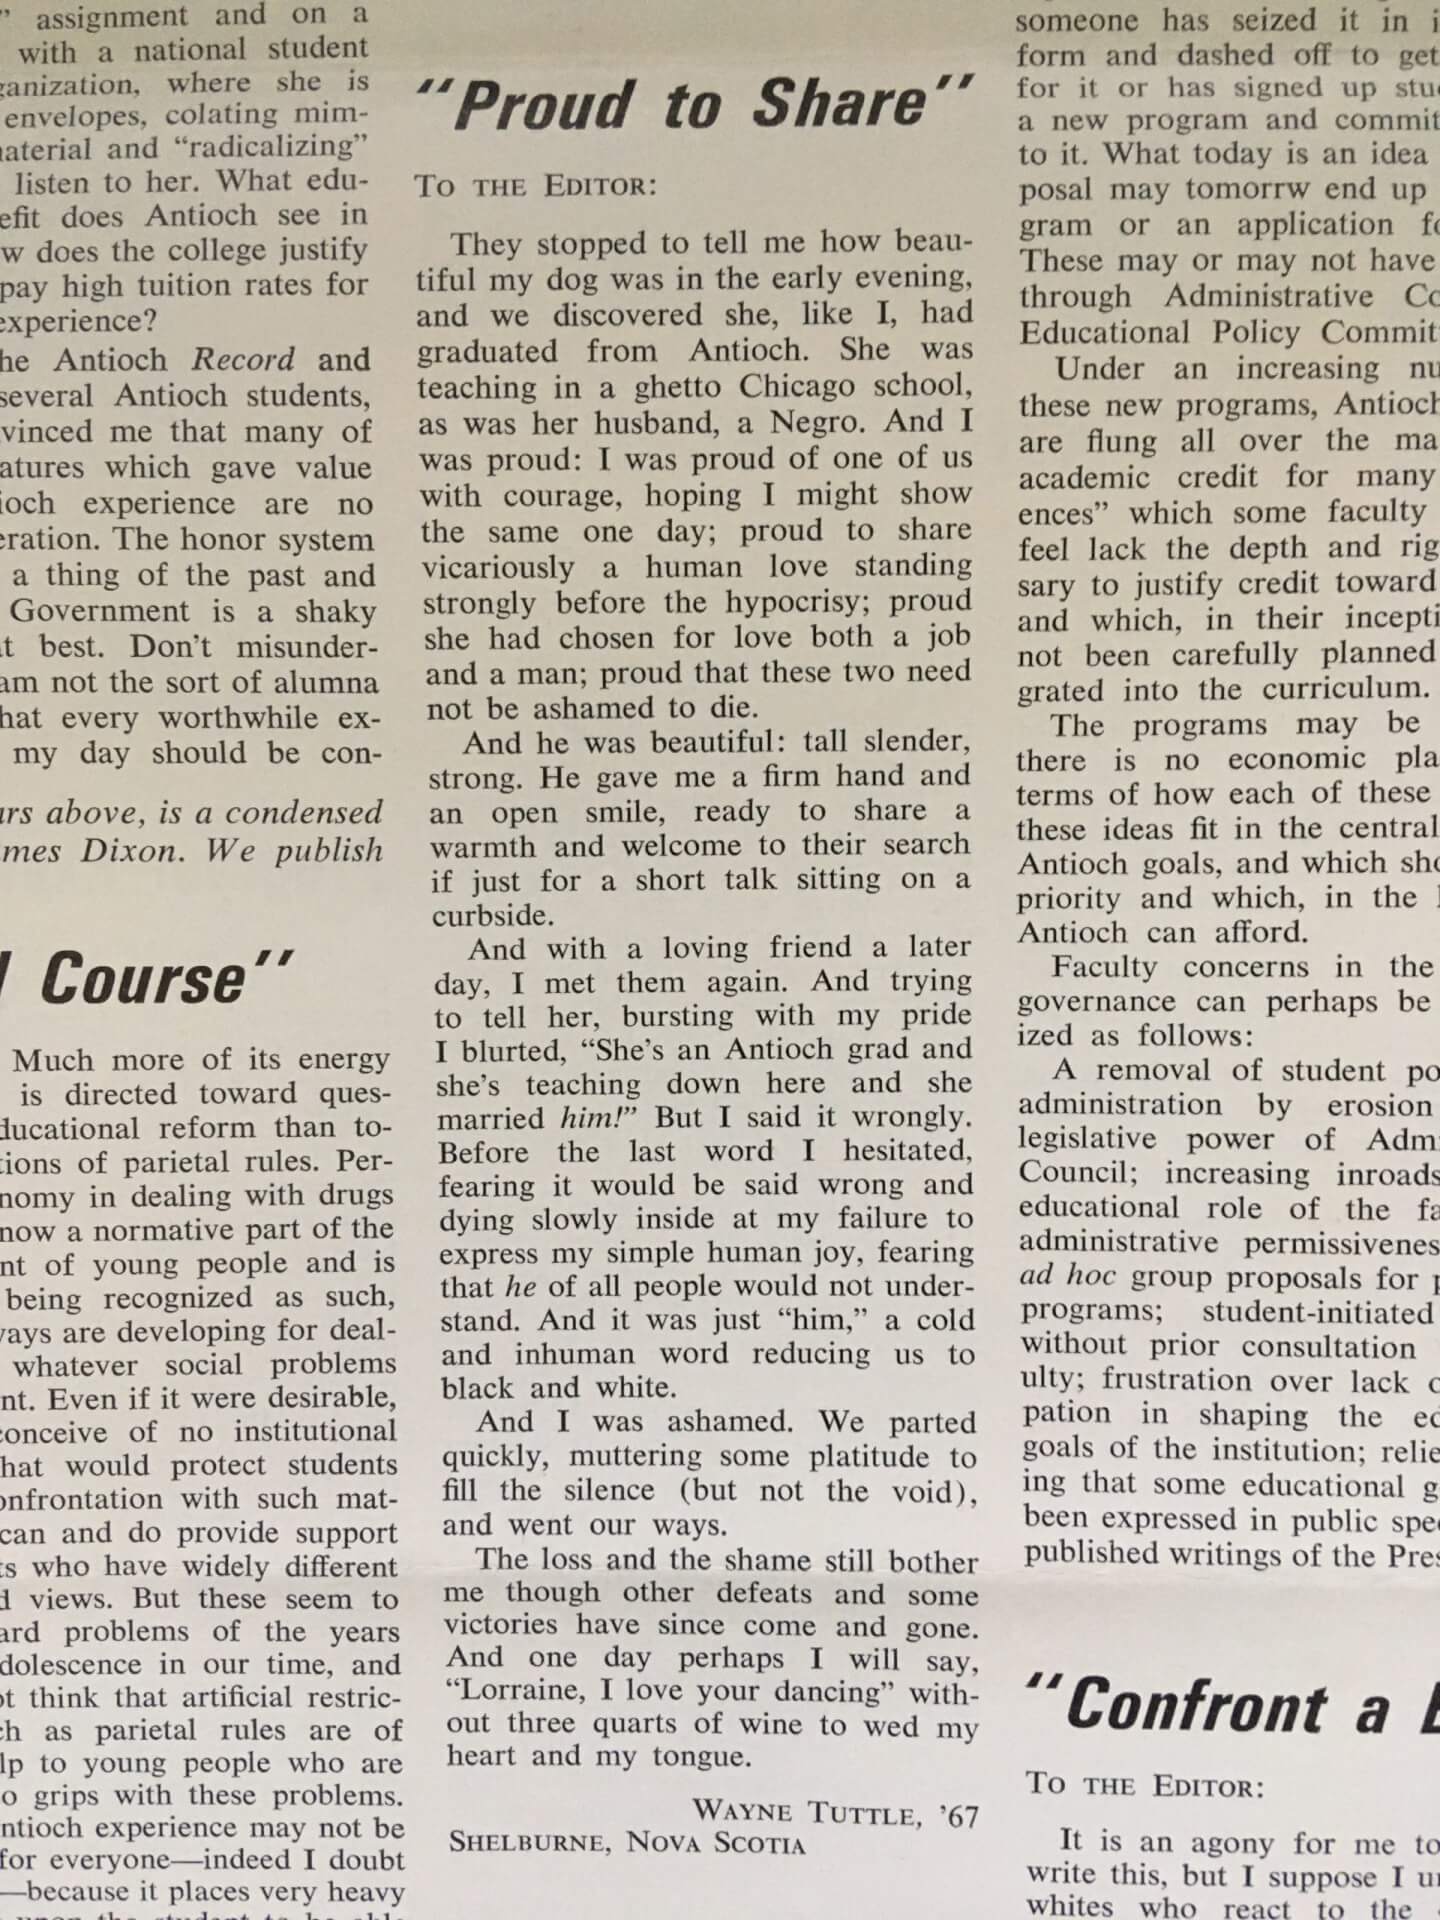 Letter to the Editor by Wayne Tuttle '67 in May 1968 issue of The Antiochian.